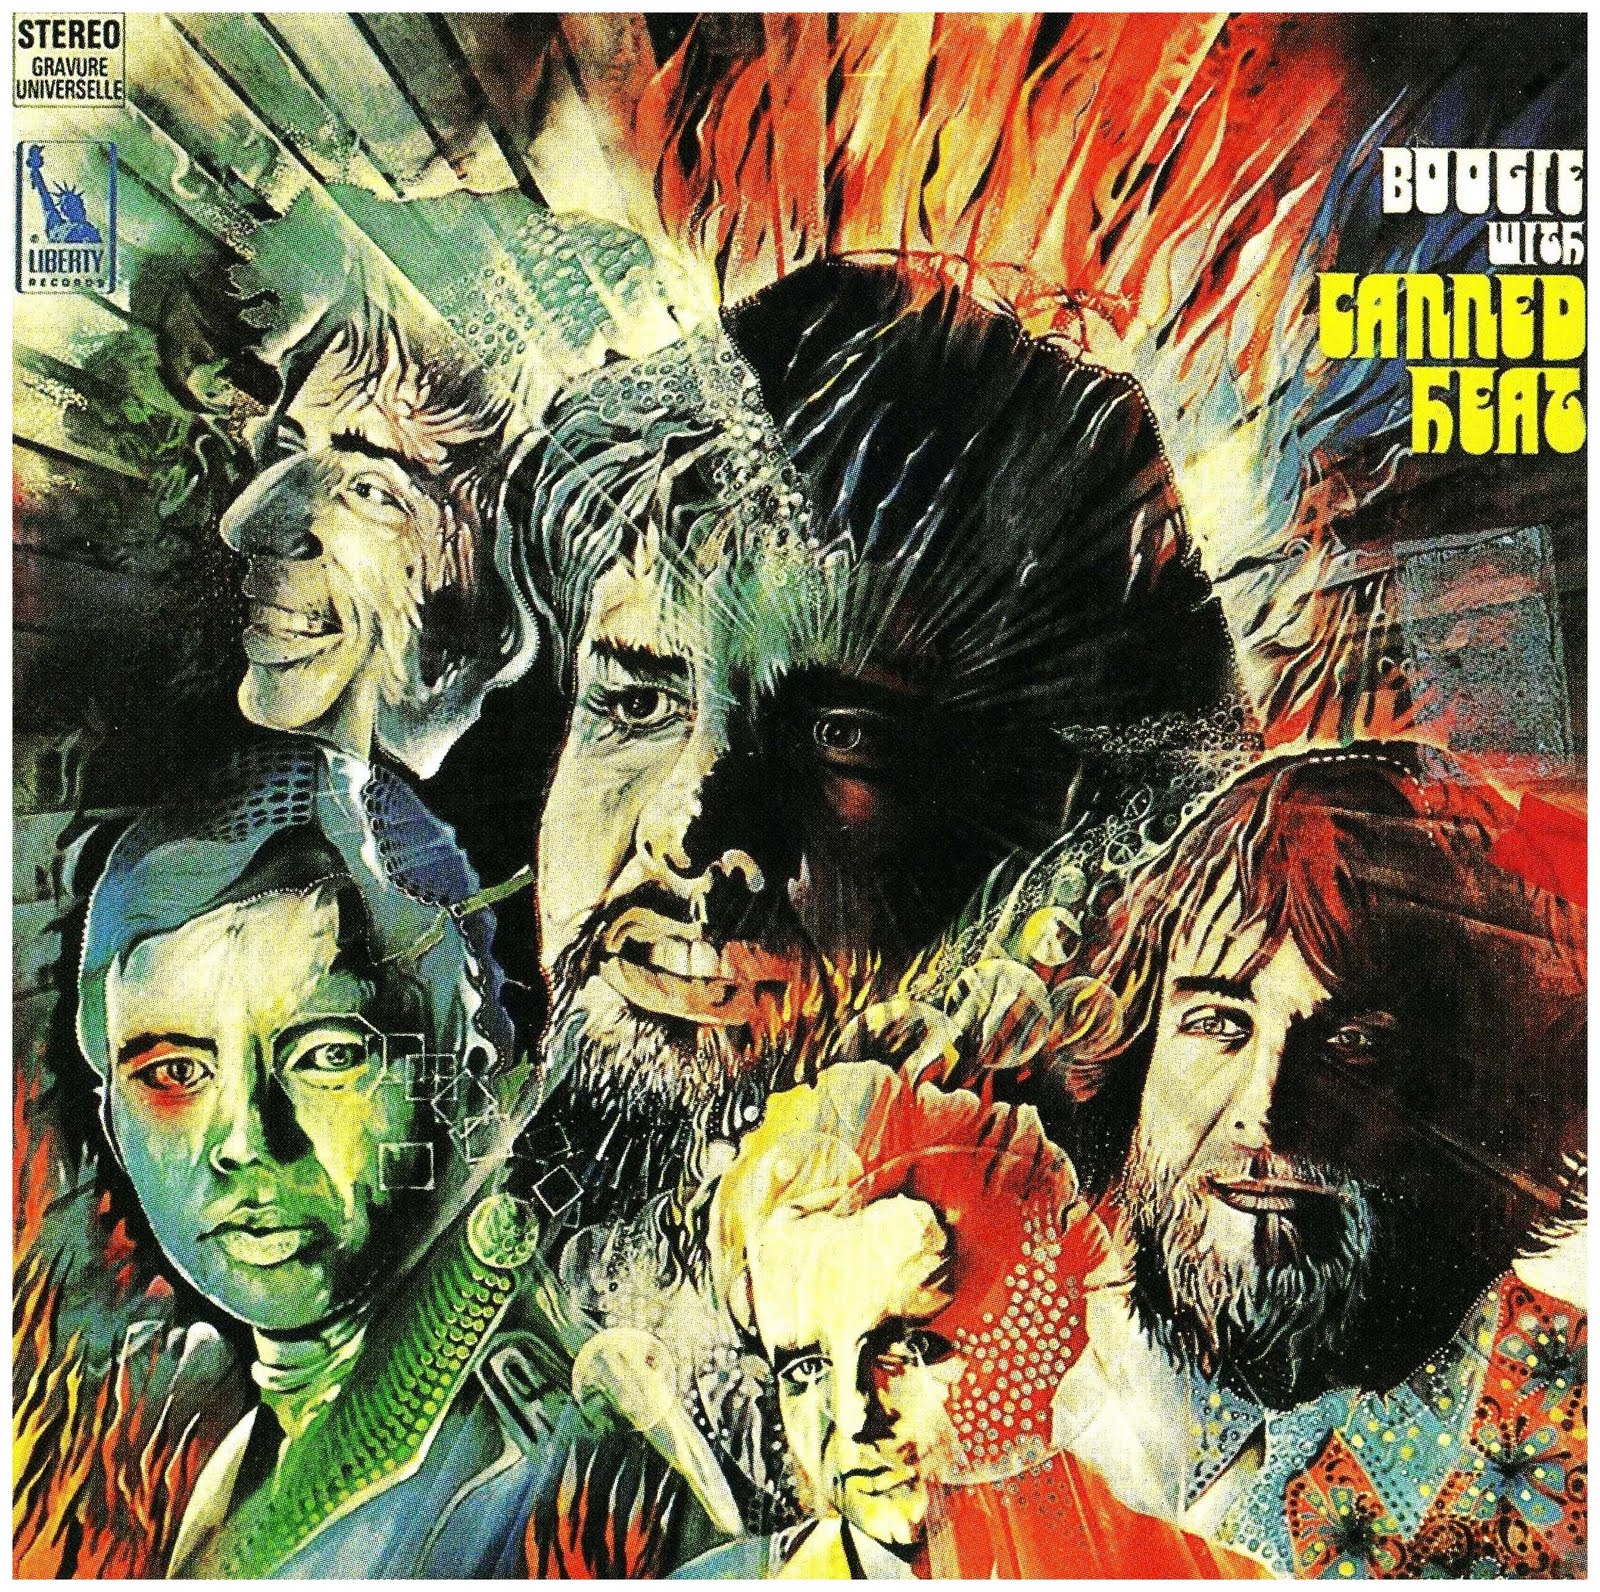 Canned Heat - Boogie With Canned Heat at Discogs